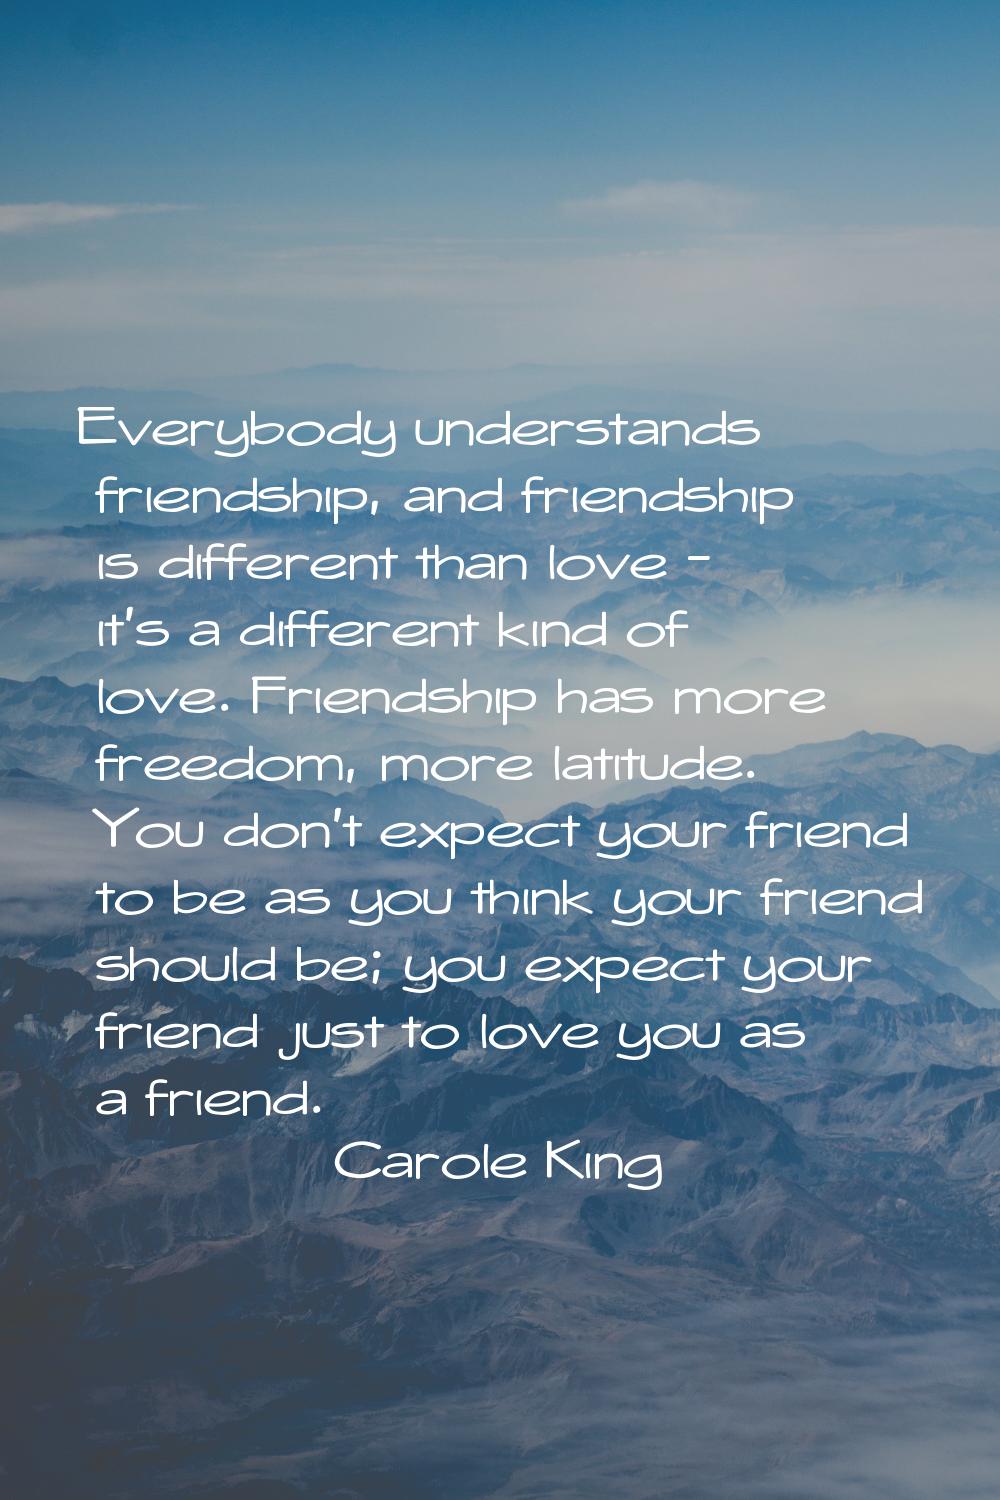 Everybody understands friendship, and friendship is different than love - it's a different kind of 